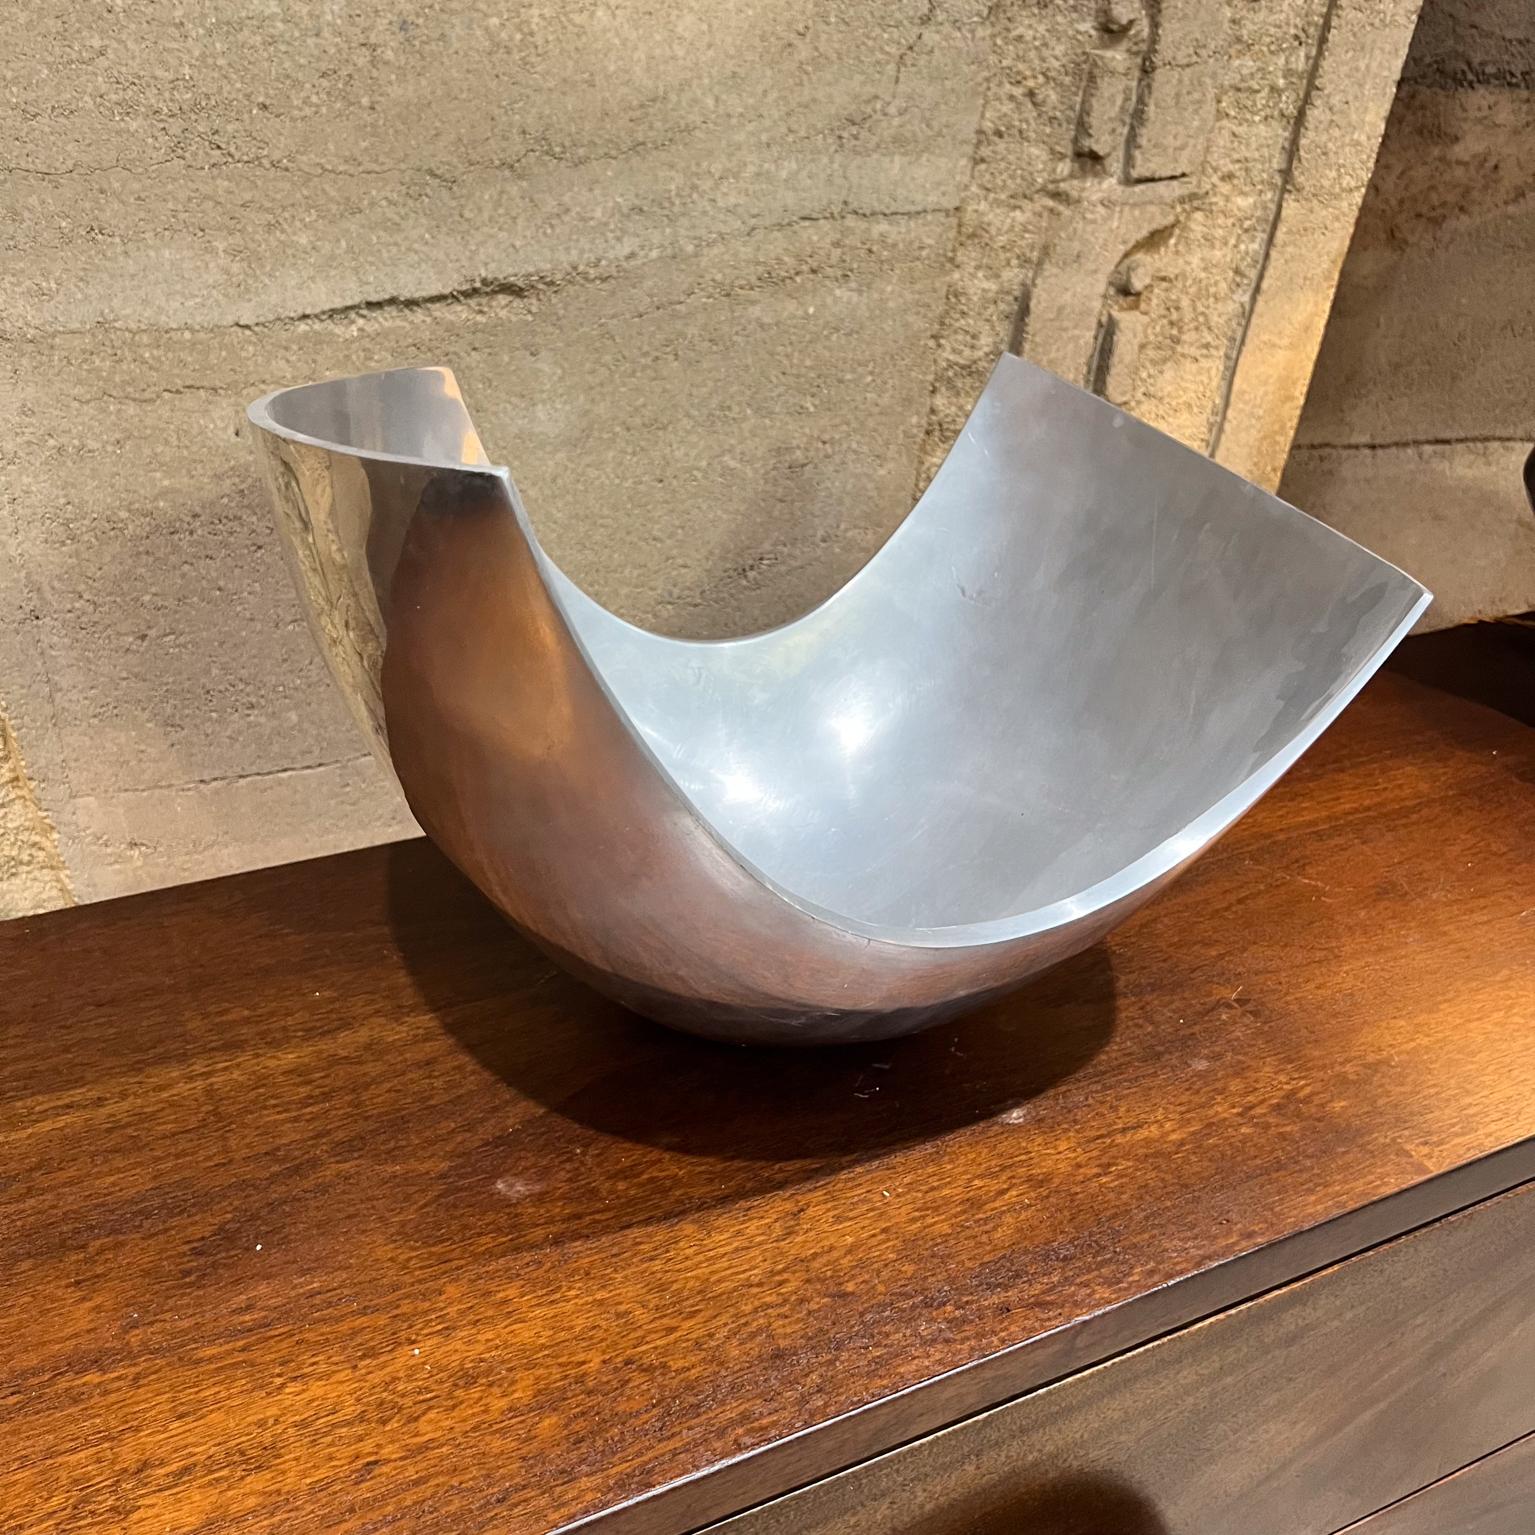 Large Sculptural Serving Bowl by Michael Lax Grainware for METAAL
Polished Aluminum
12 h x 18.5 w x 16.5 d
Preowned unrestored vintage condition
See images provided.